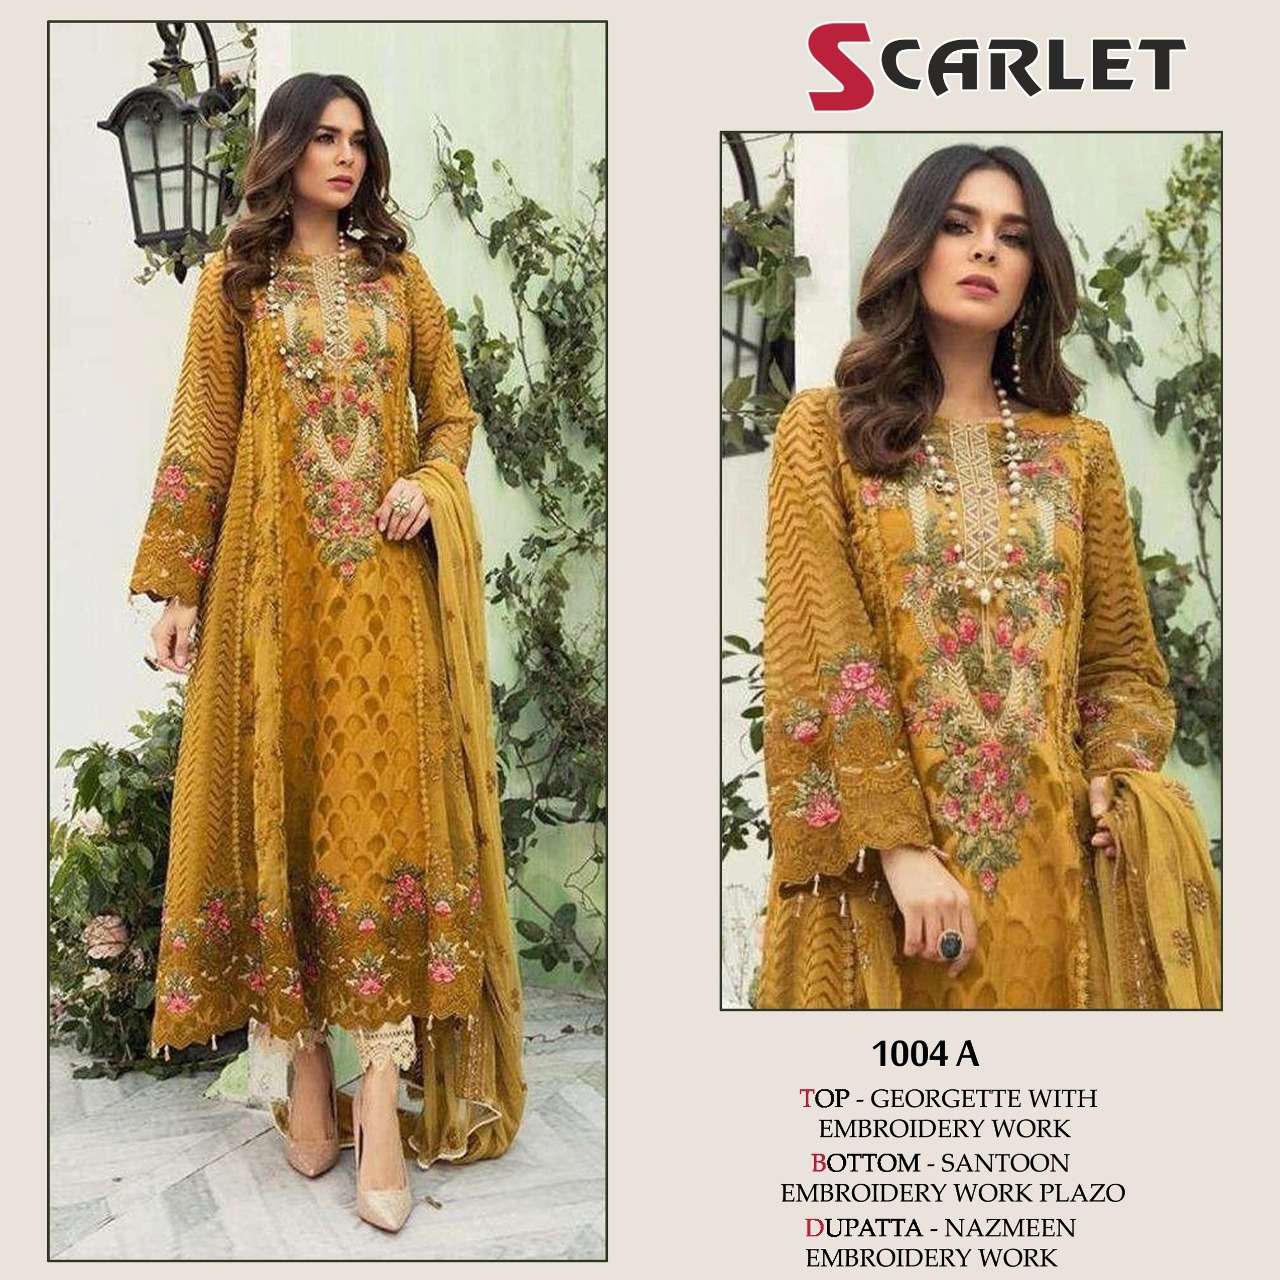 SCARLET 1004 A DESIGNER GEORGETTE WITH EMBROIDERY WORK PAKISTANI REPLICA SUITS SINGLES